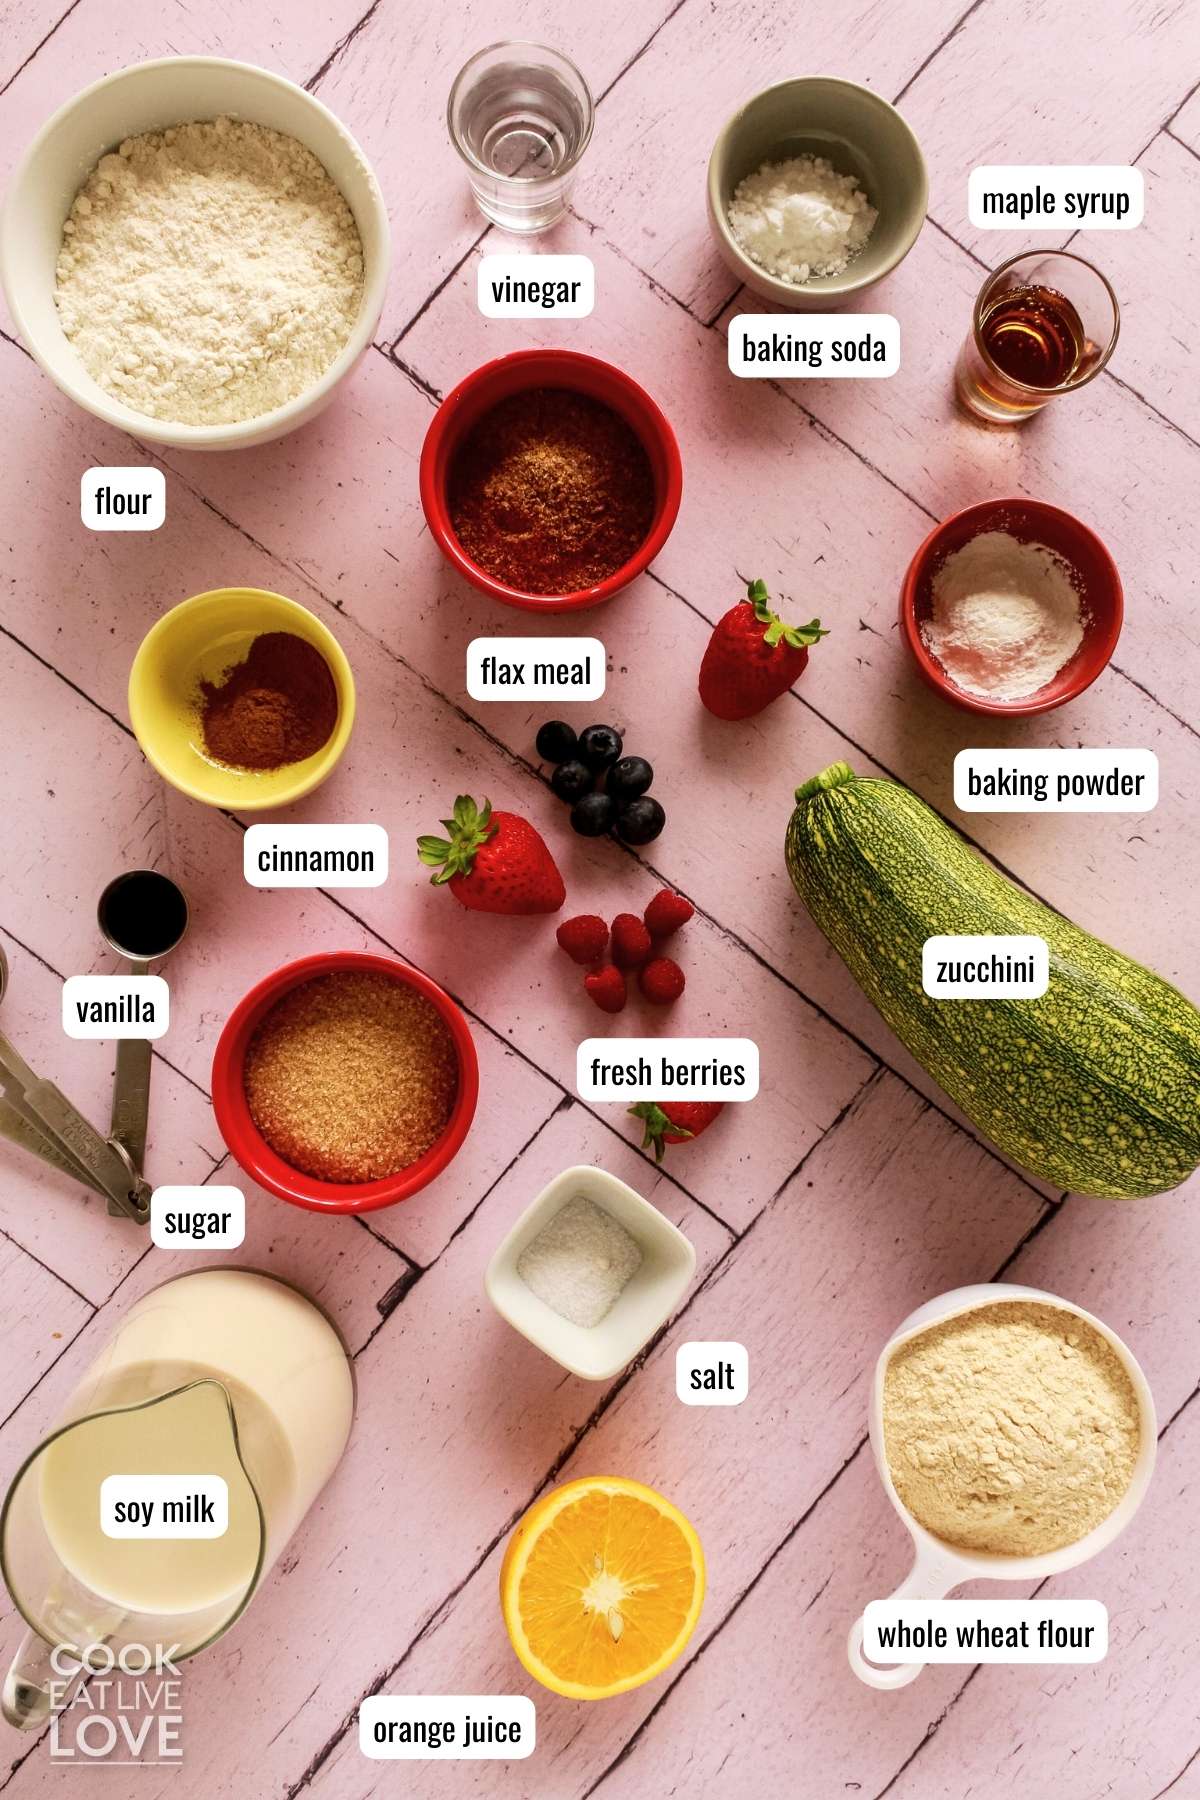 Ingredients needed for making sheet pan pancakes laid out before preparing.